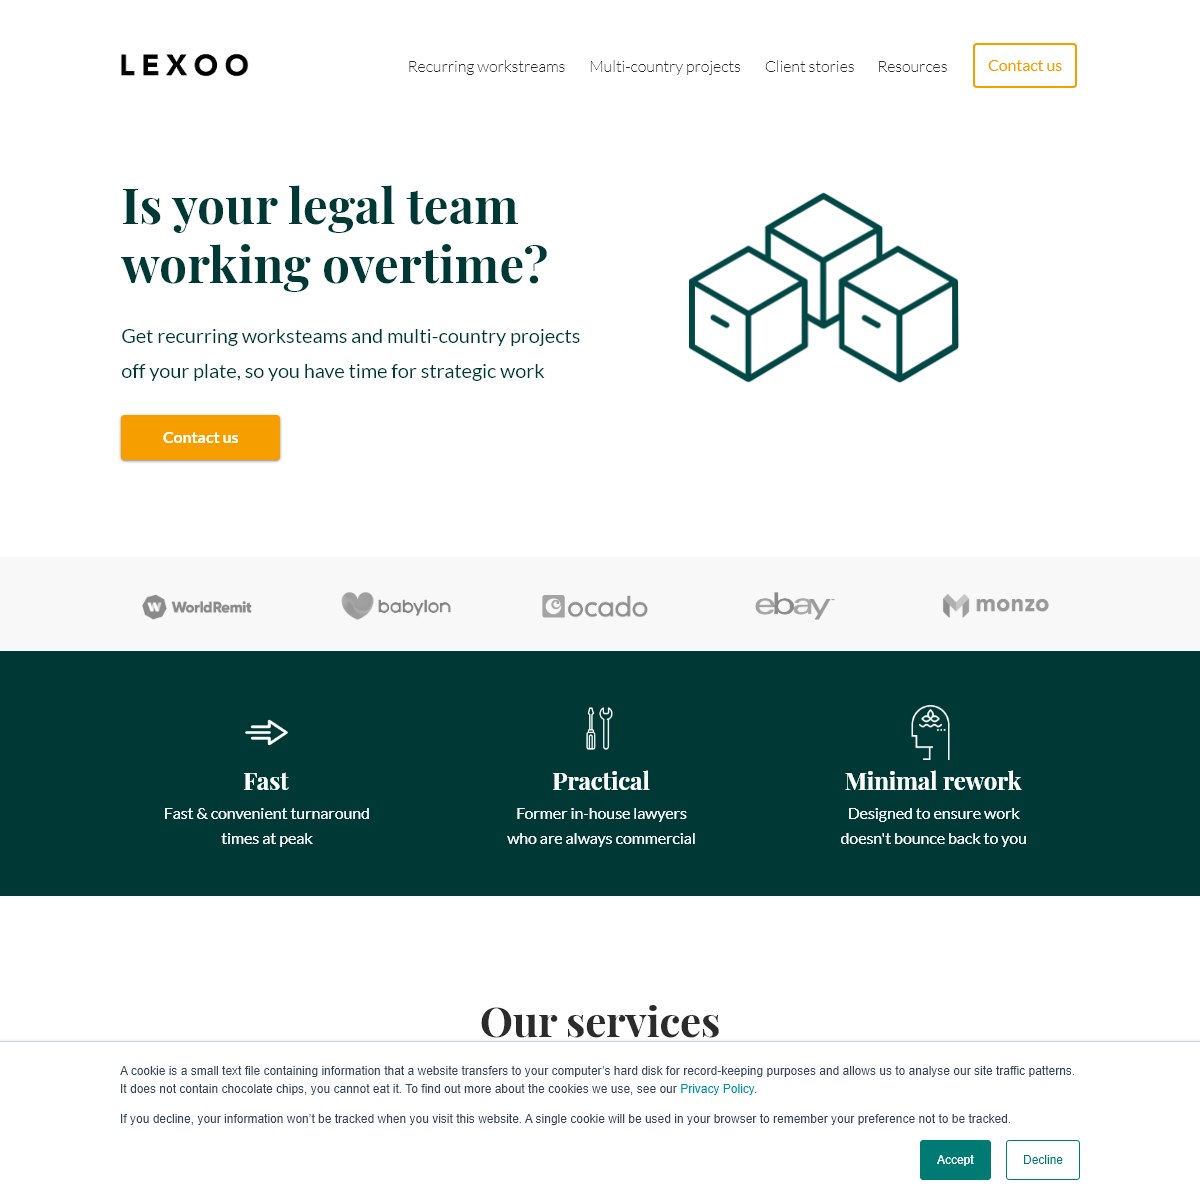 Lexoo - Get recurring legal work off your plate